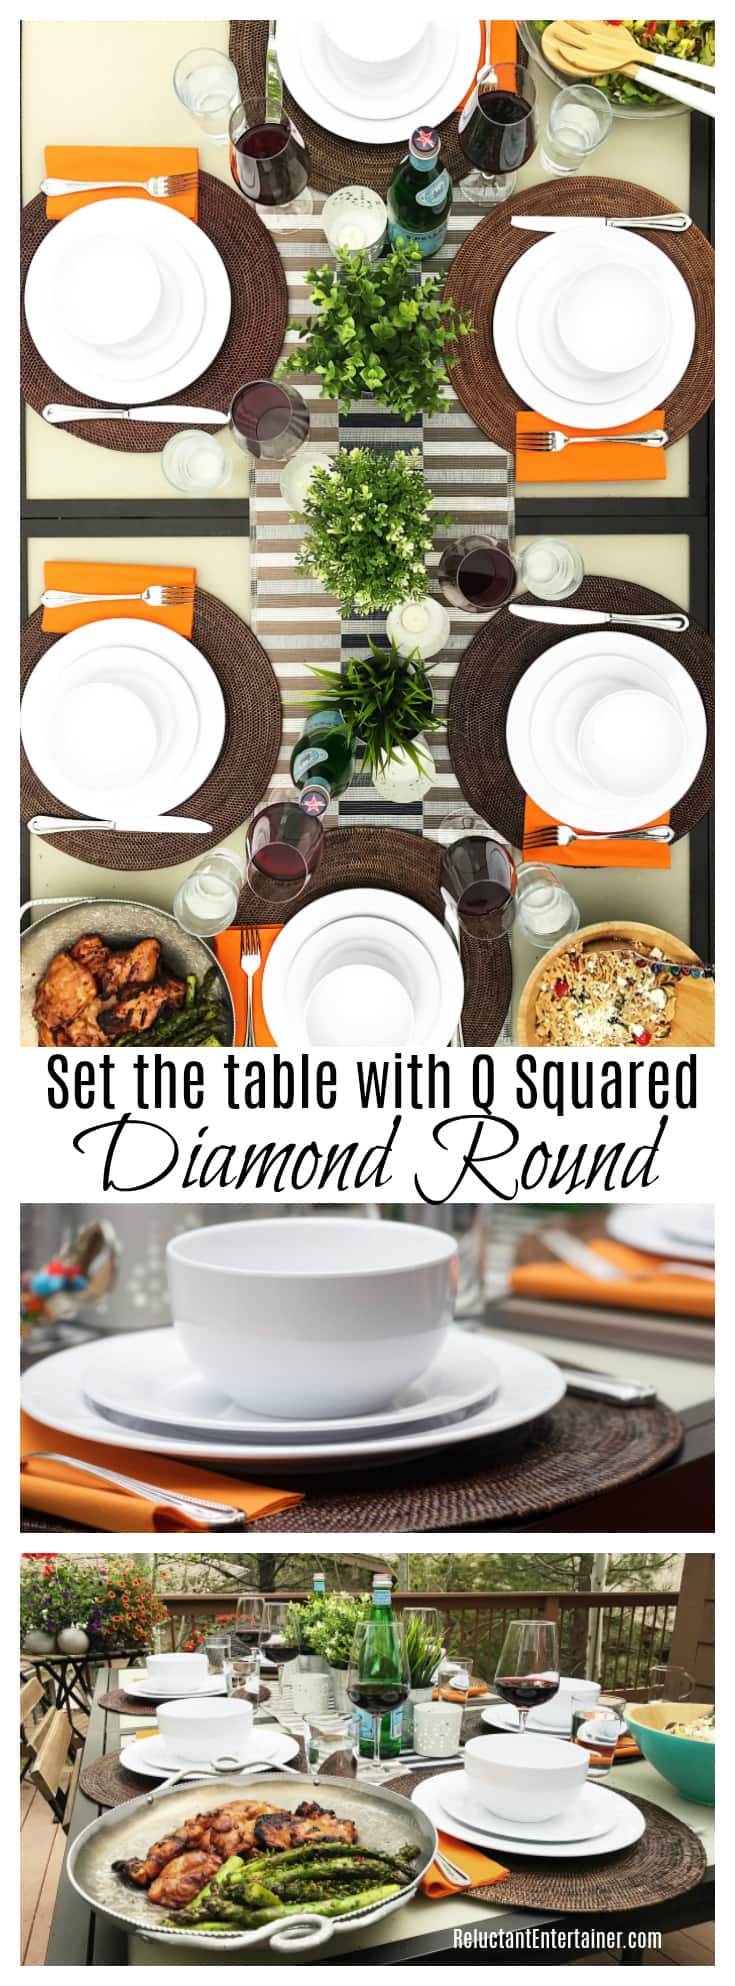 Set the table with Q Squared Diamond Round